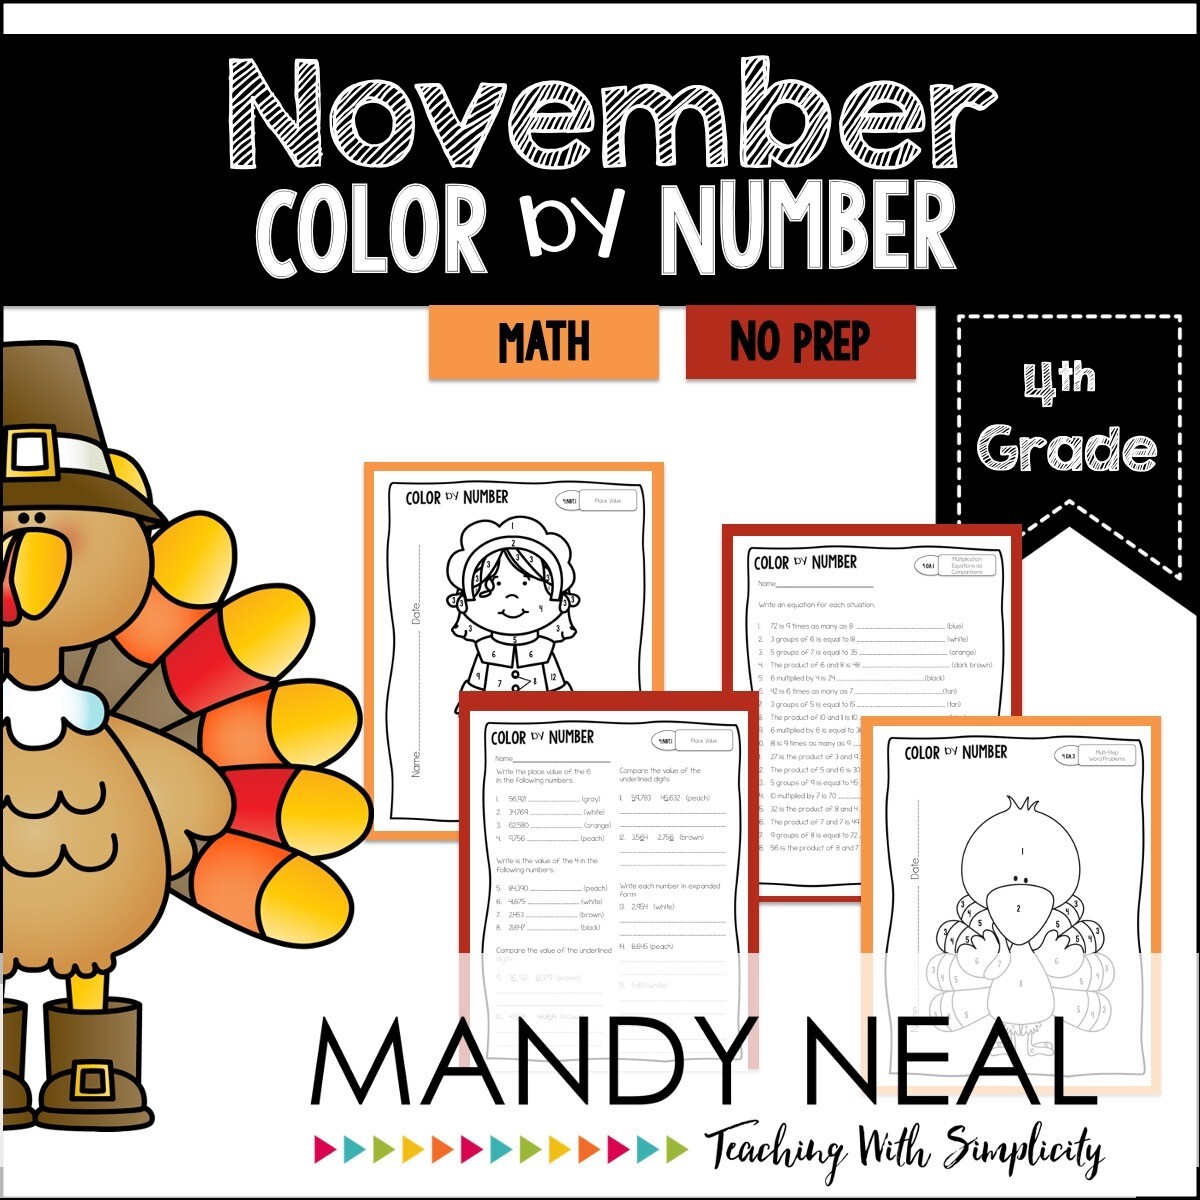 November Color By Number for 4th Grade Math